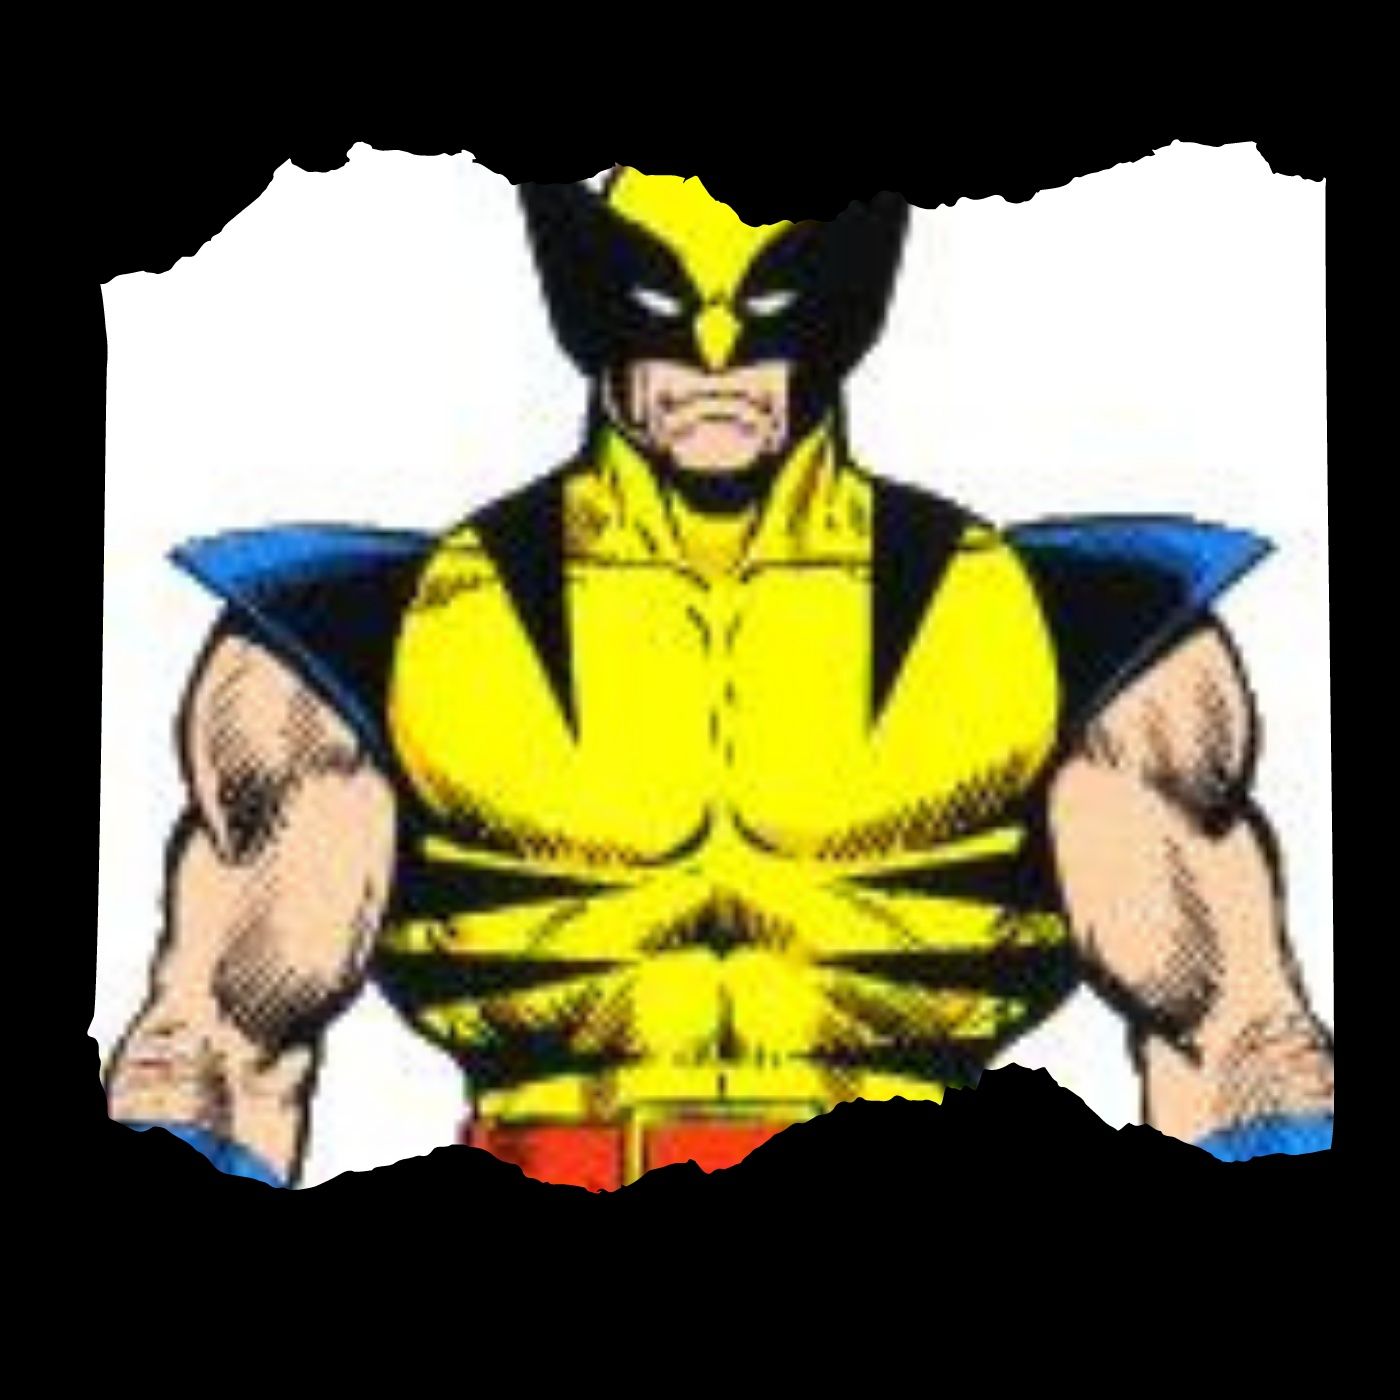 THE PSYCHOLOGY OF WOLVERINE